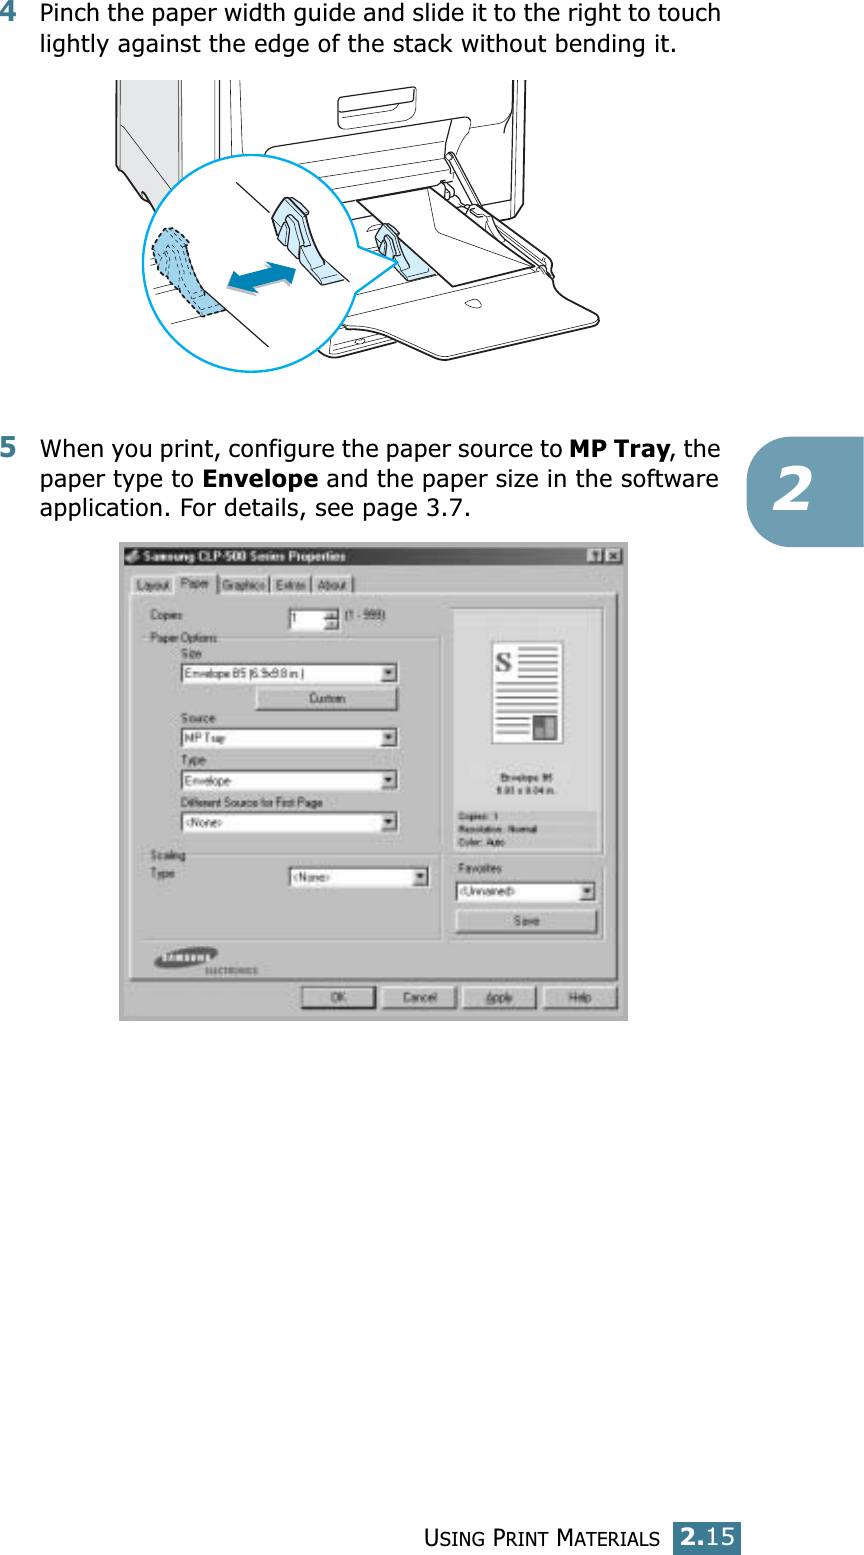 USING PRINT MATERIALS2.1524Pinch the paper width guide and slide it to the right to touch lightly against the edge of the stack without bending it.5When you print, configure the paper source to MP Tray, the paper type to Envelope and the paper size in the software application. For details, see page 3.7. 